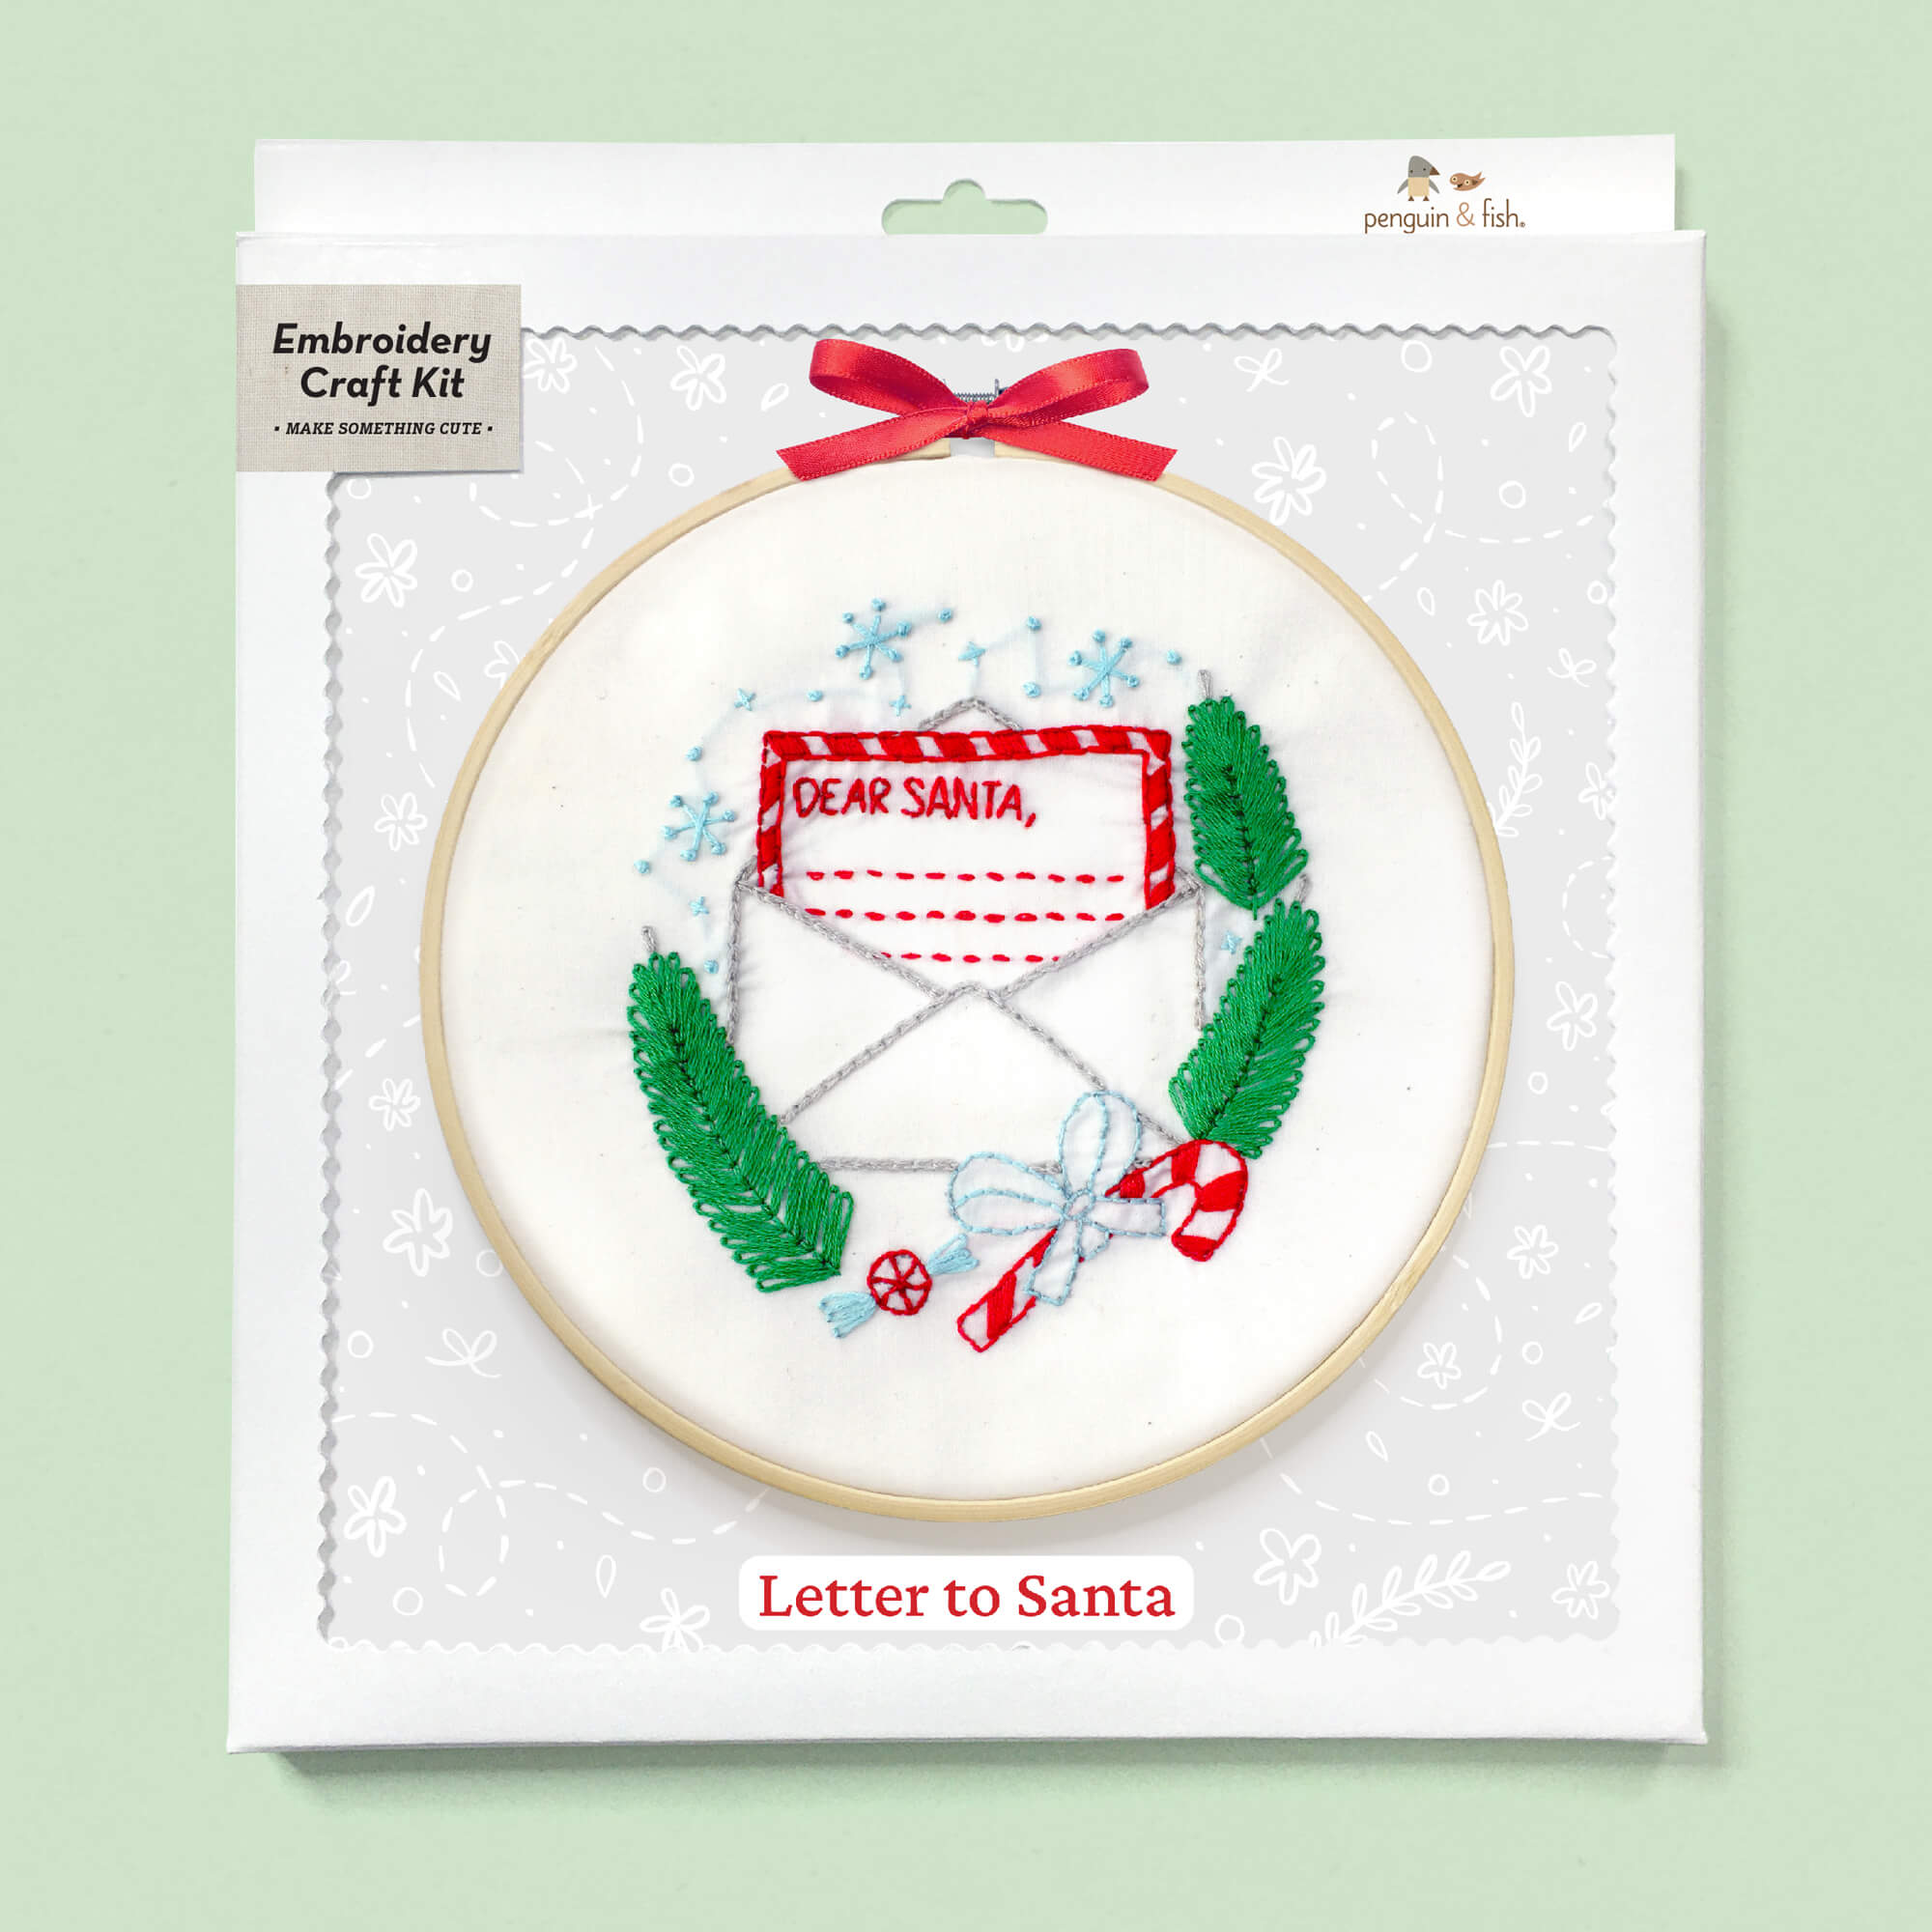 Letter to Santa embroidery kit in a box